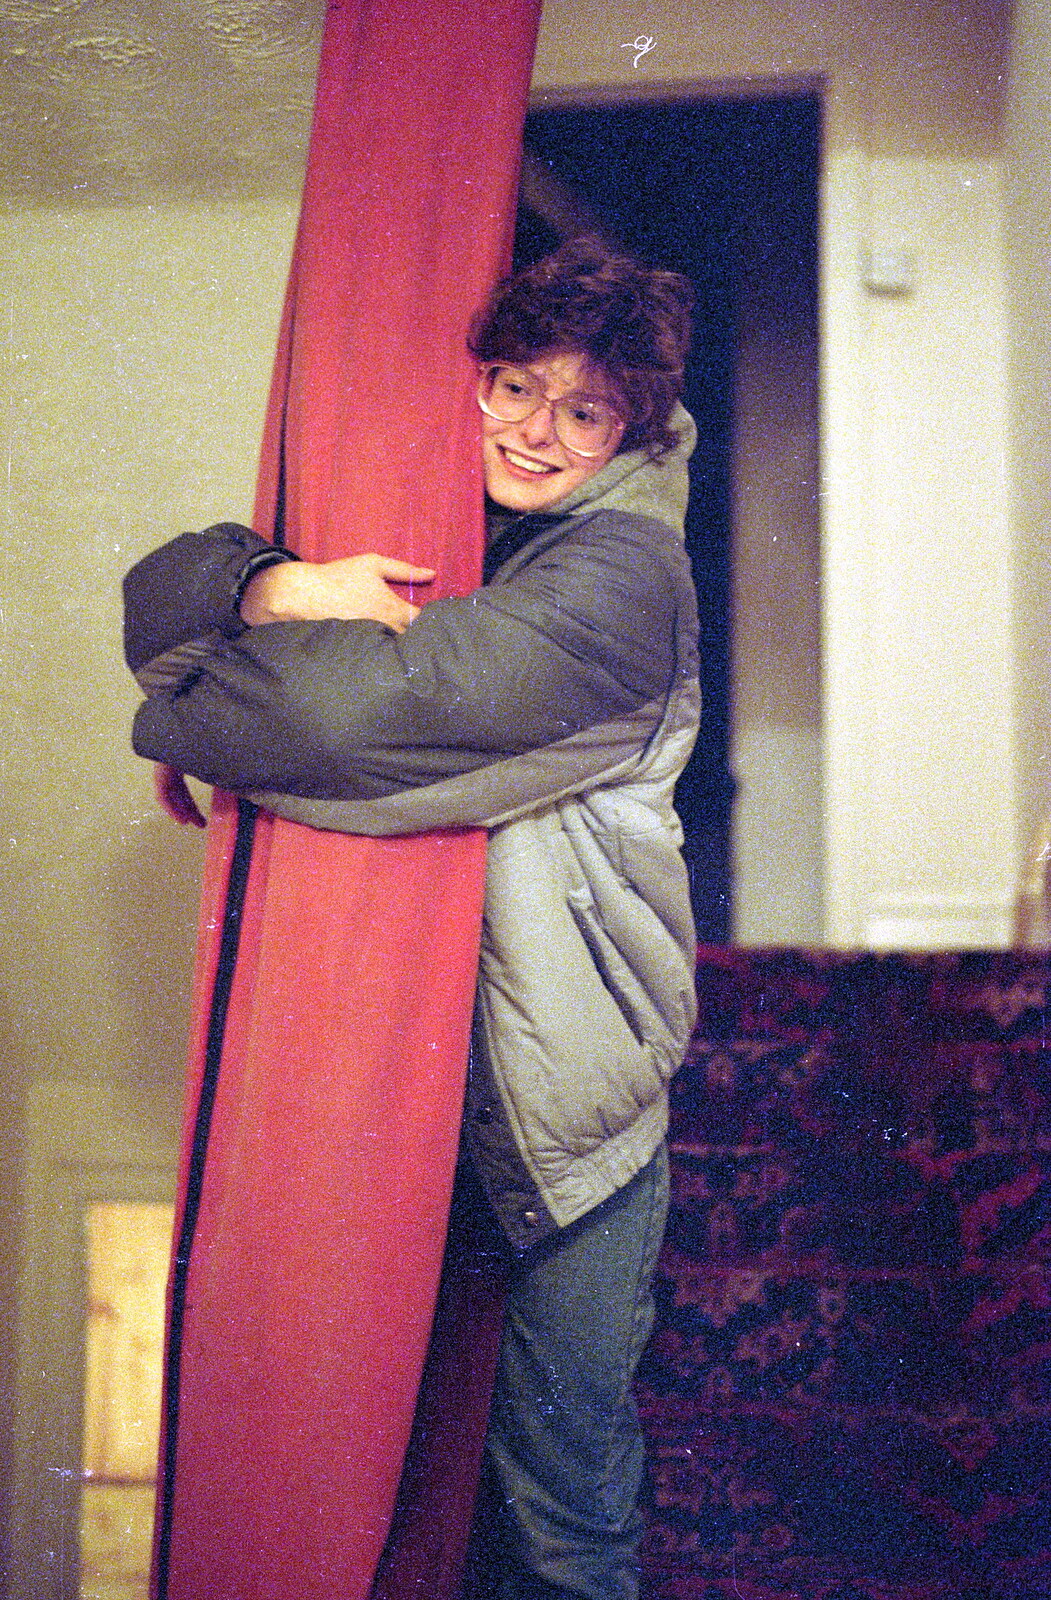 Barbara hugs James' hang glider from Uni: First Weeks At Polytechnic, Umbrellas and a Visit From Liz, Plymouth - 26th September 1985